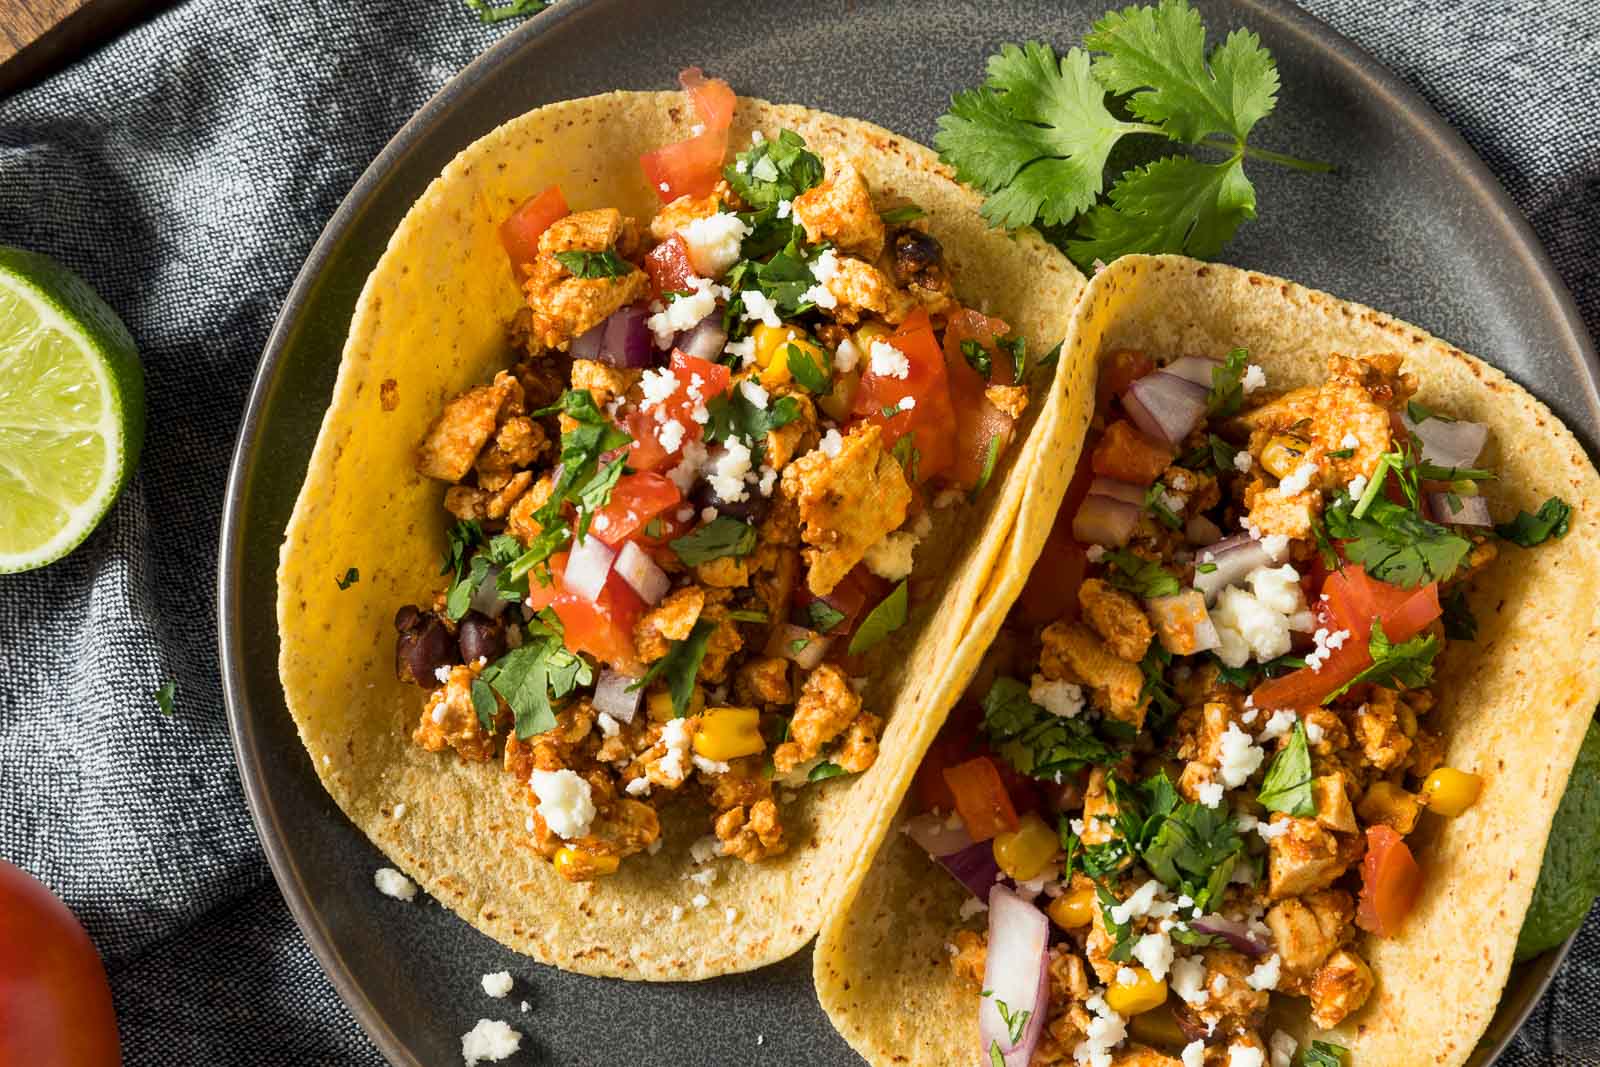 Mexican Taco Recipe With Spicy Tofu Crumble